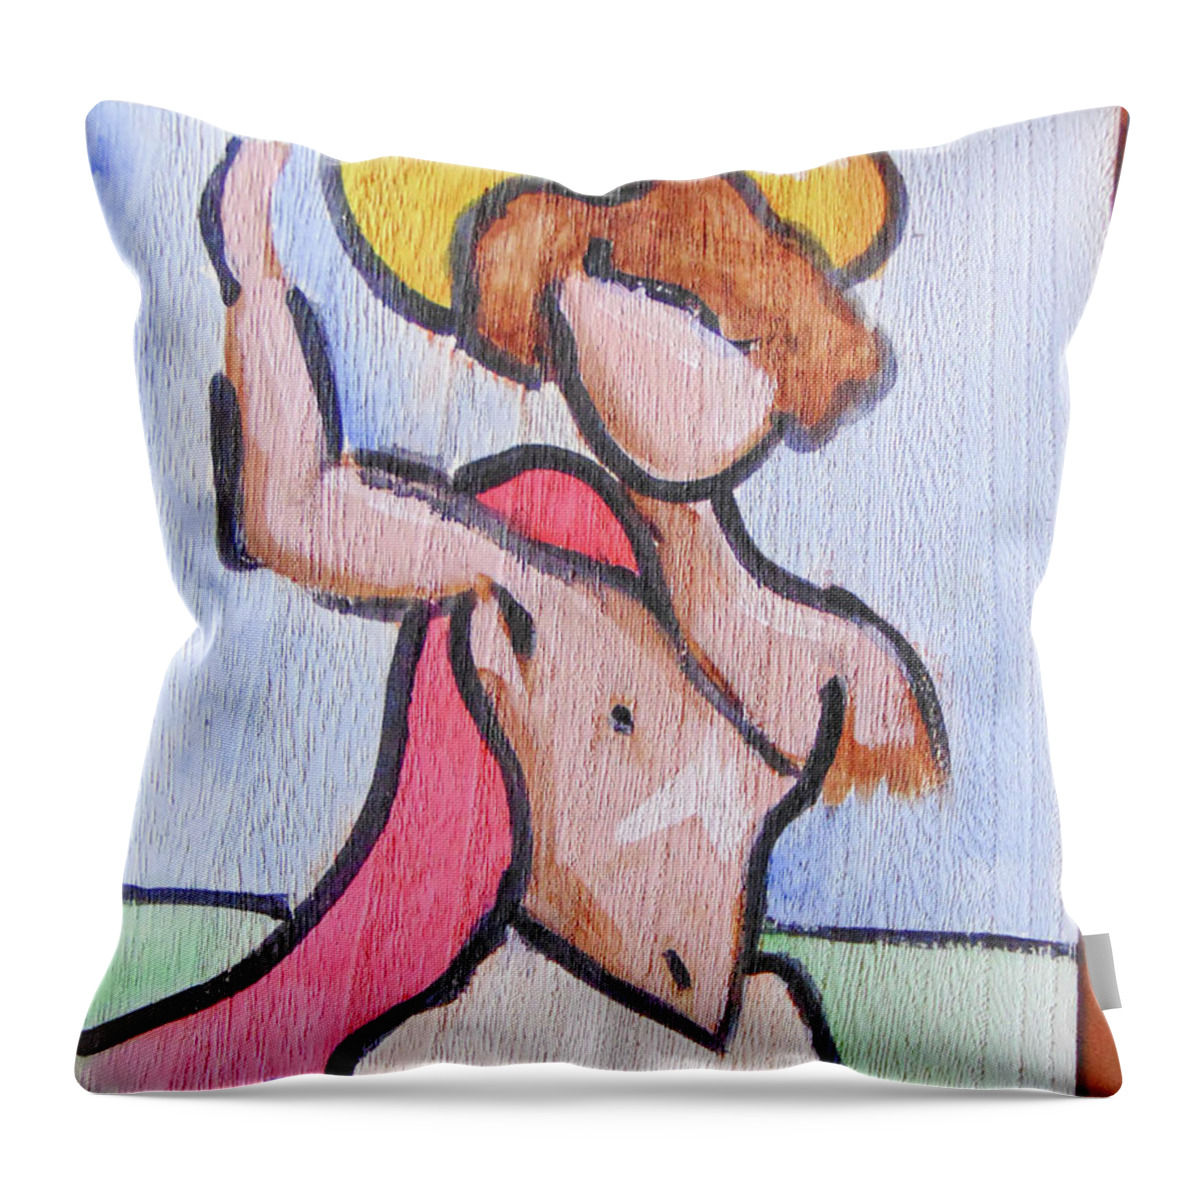 Art Throw Pillow featuring the painting Aesun by Loretta Nash